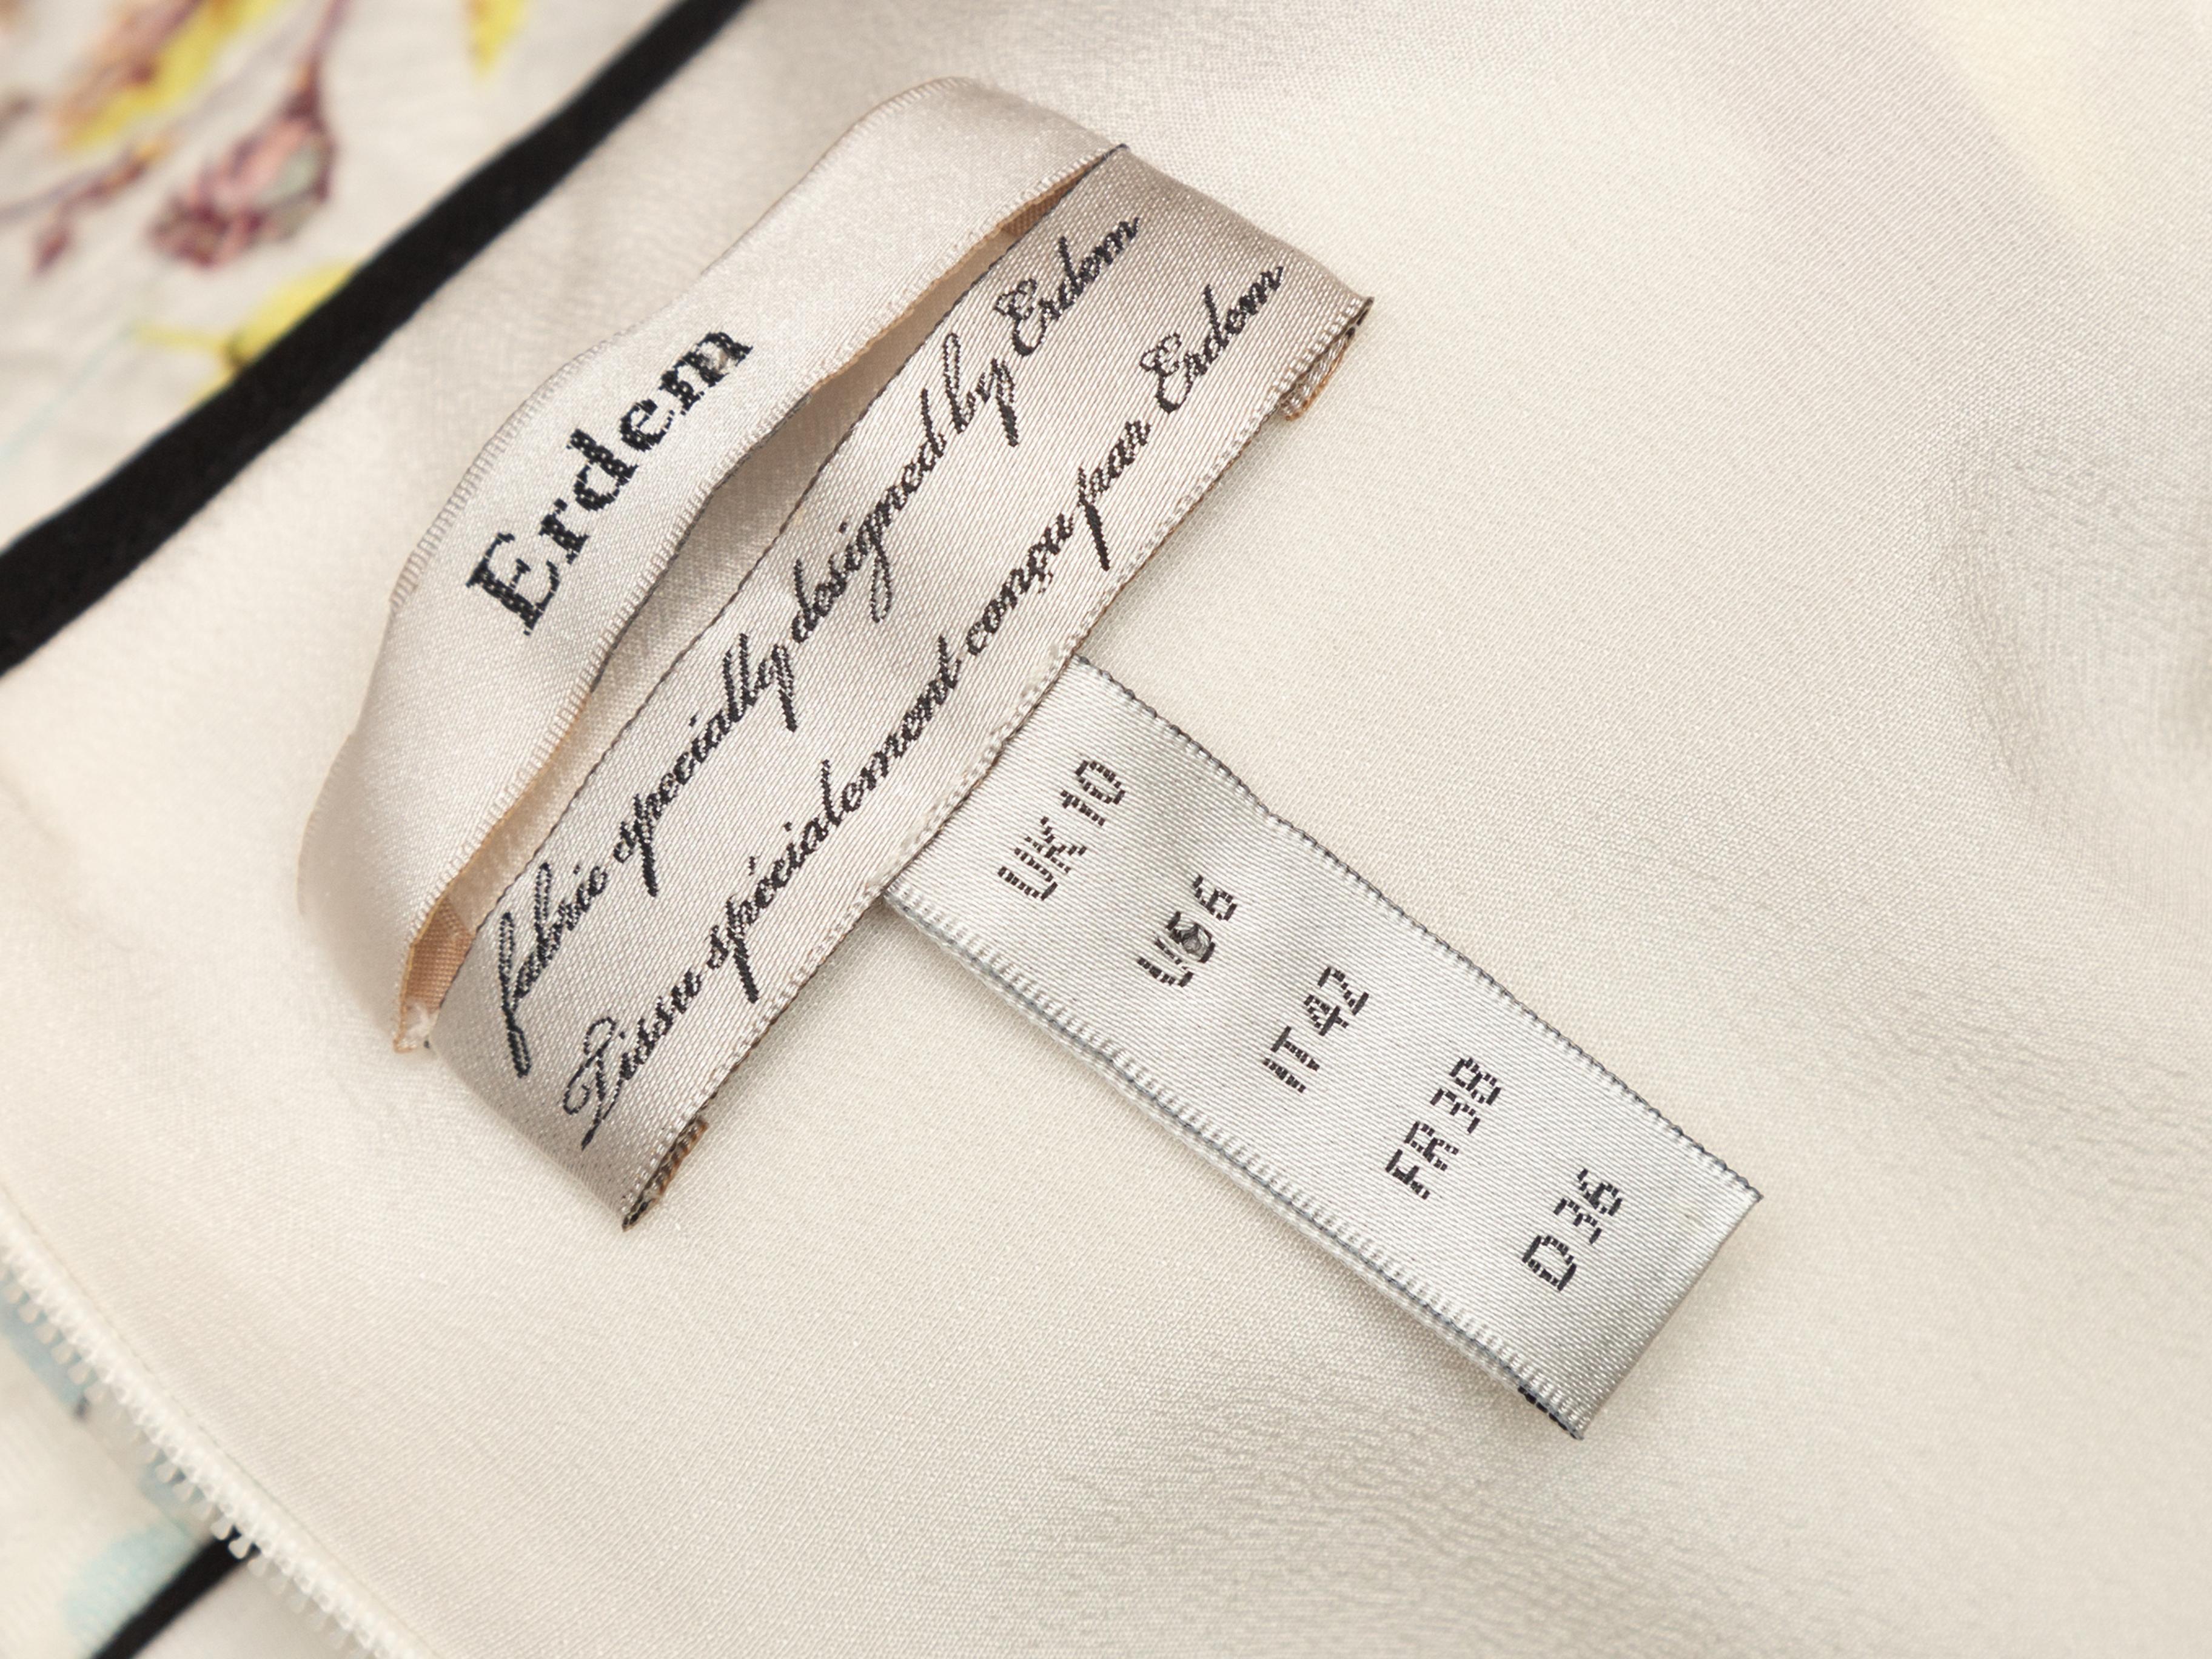 Product details: White and multicolor sleeveless floral print dress by Erdem. Crew neck. Zip closure at back. 30